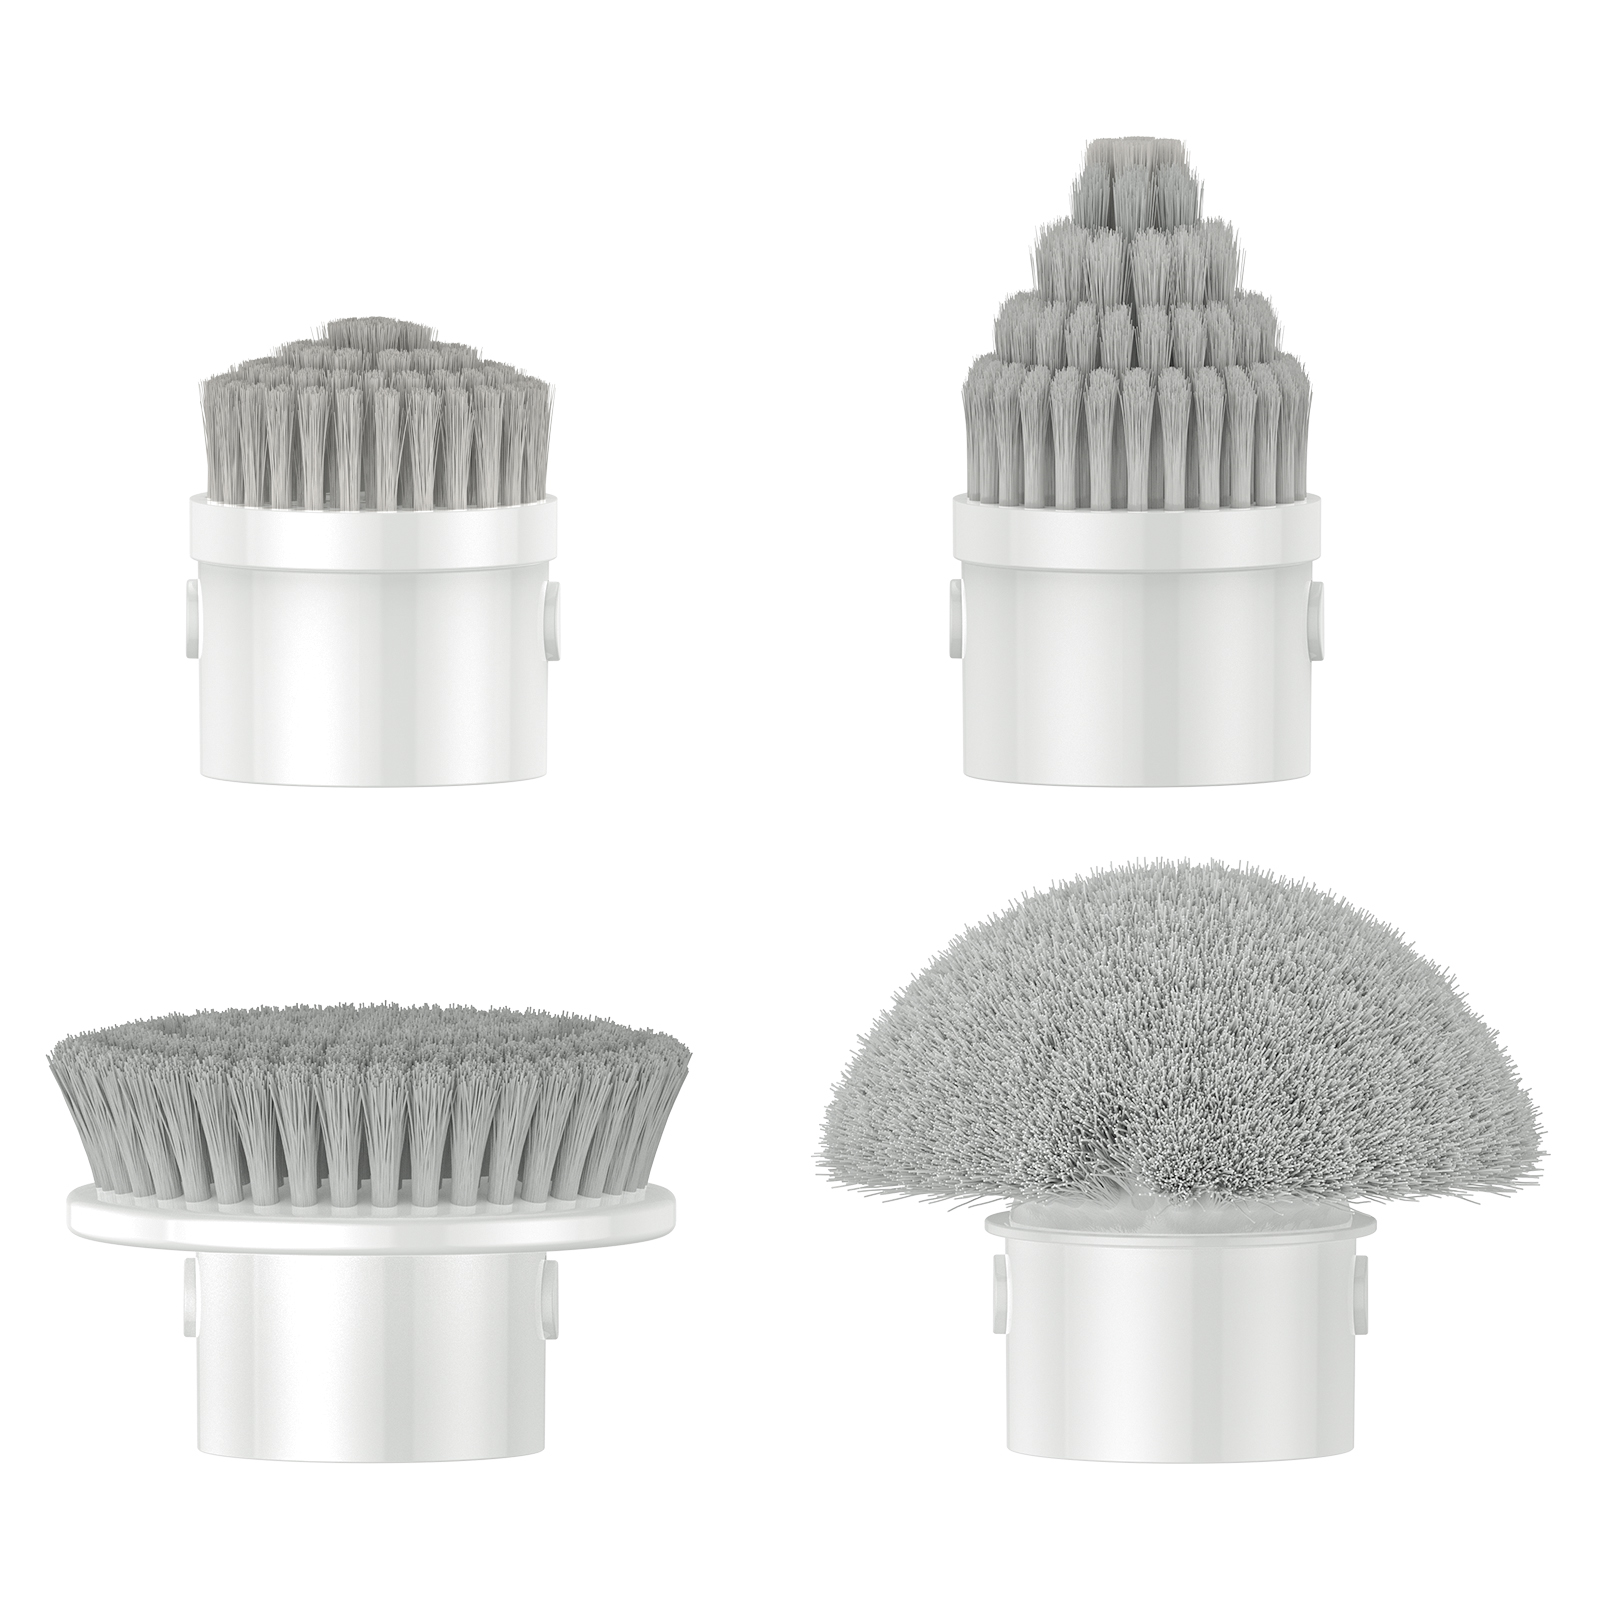 Oraimo 4pcs Replacement Brush Heads for Electric Scrubber OSS-L101A/OSS-L102A